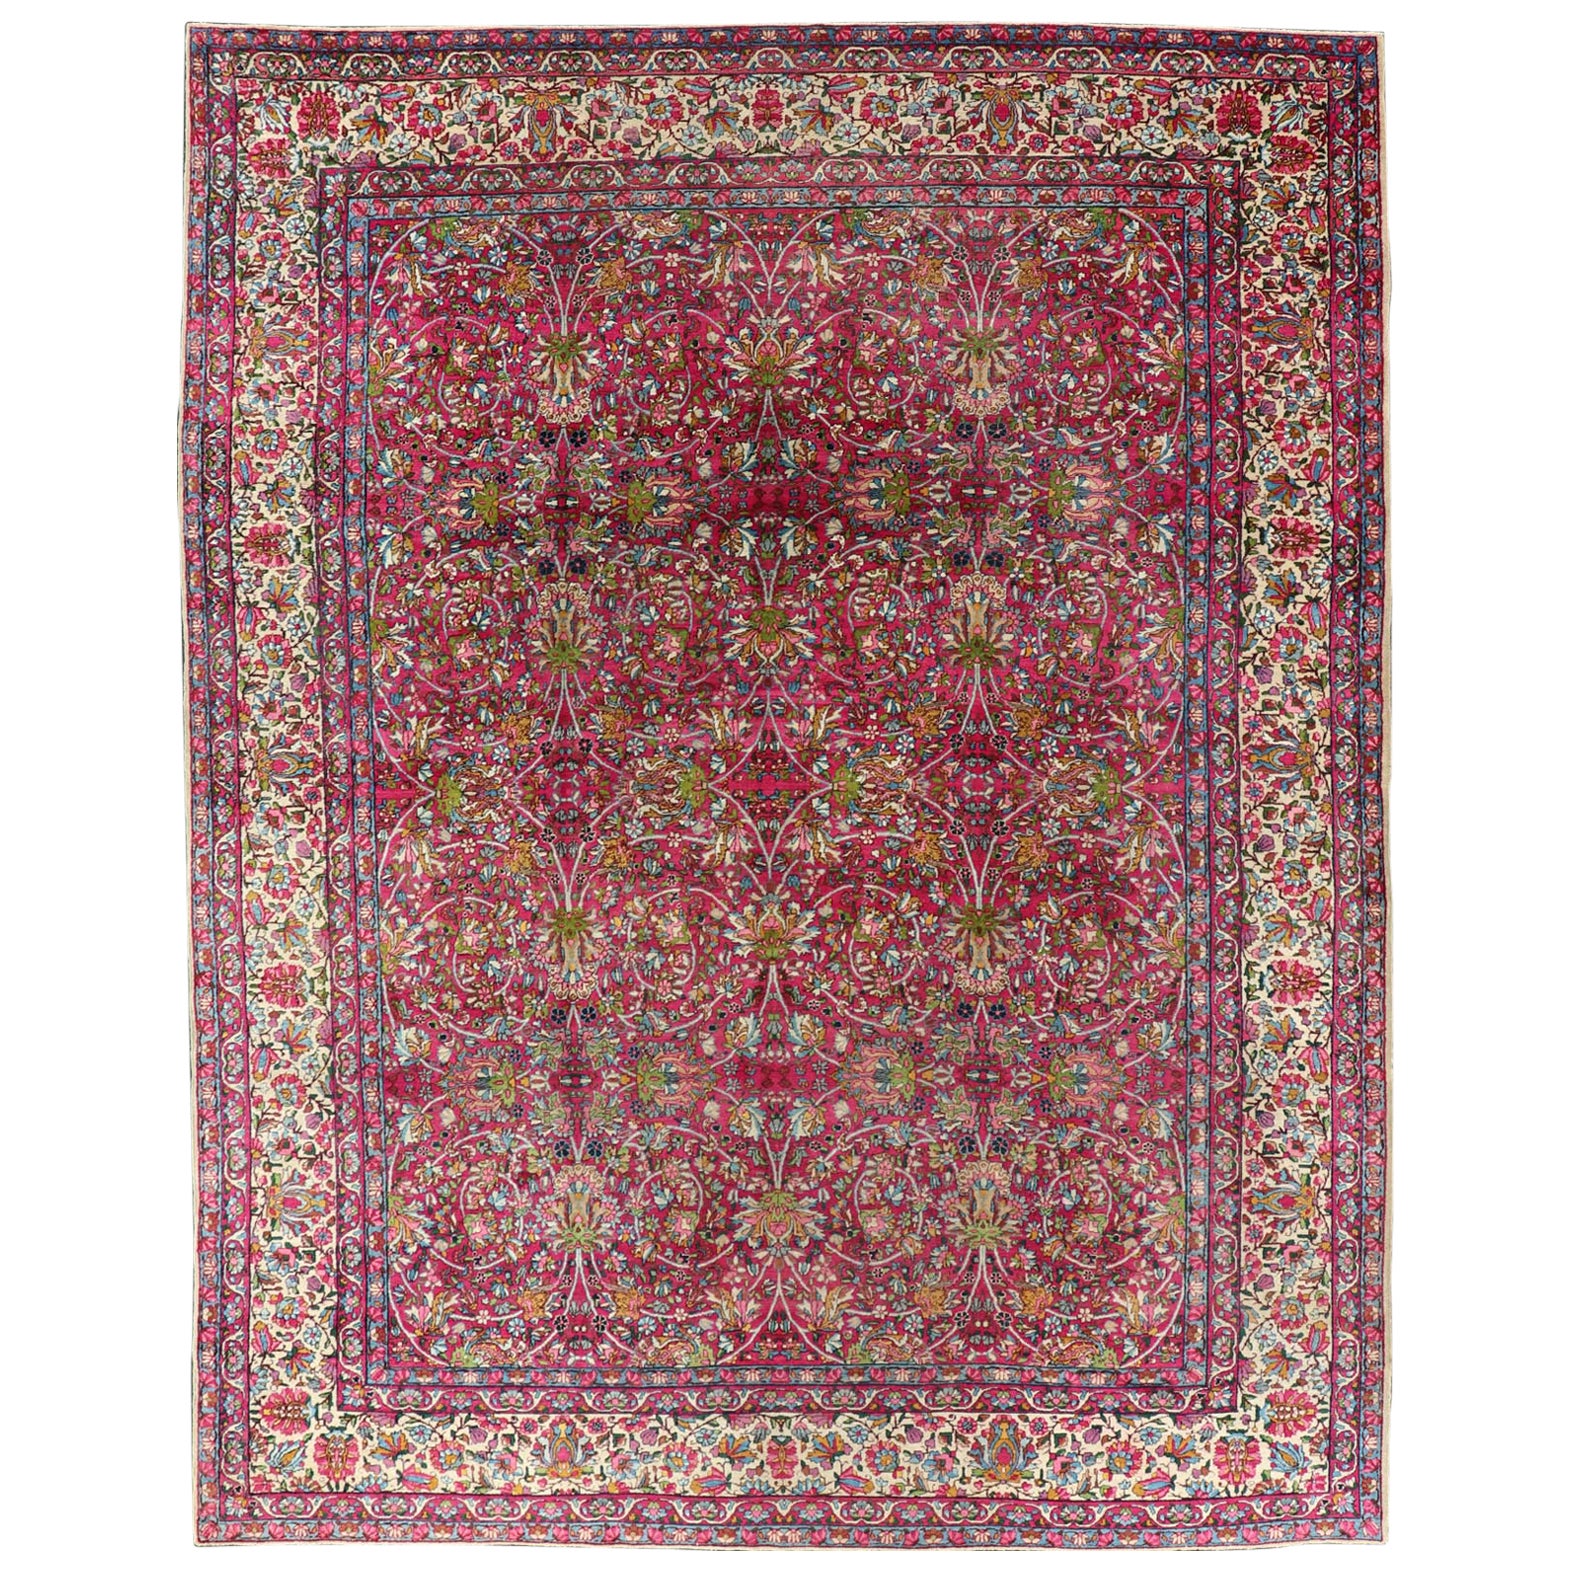  Antique Persian Lavar Kerman Rug with All-Over Floral Design In Jewel Tones  For Sale